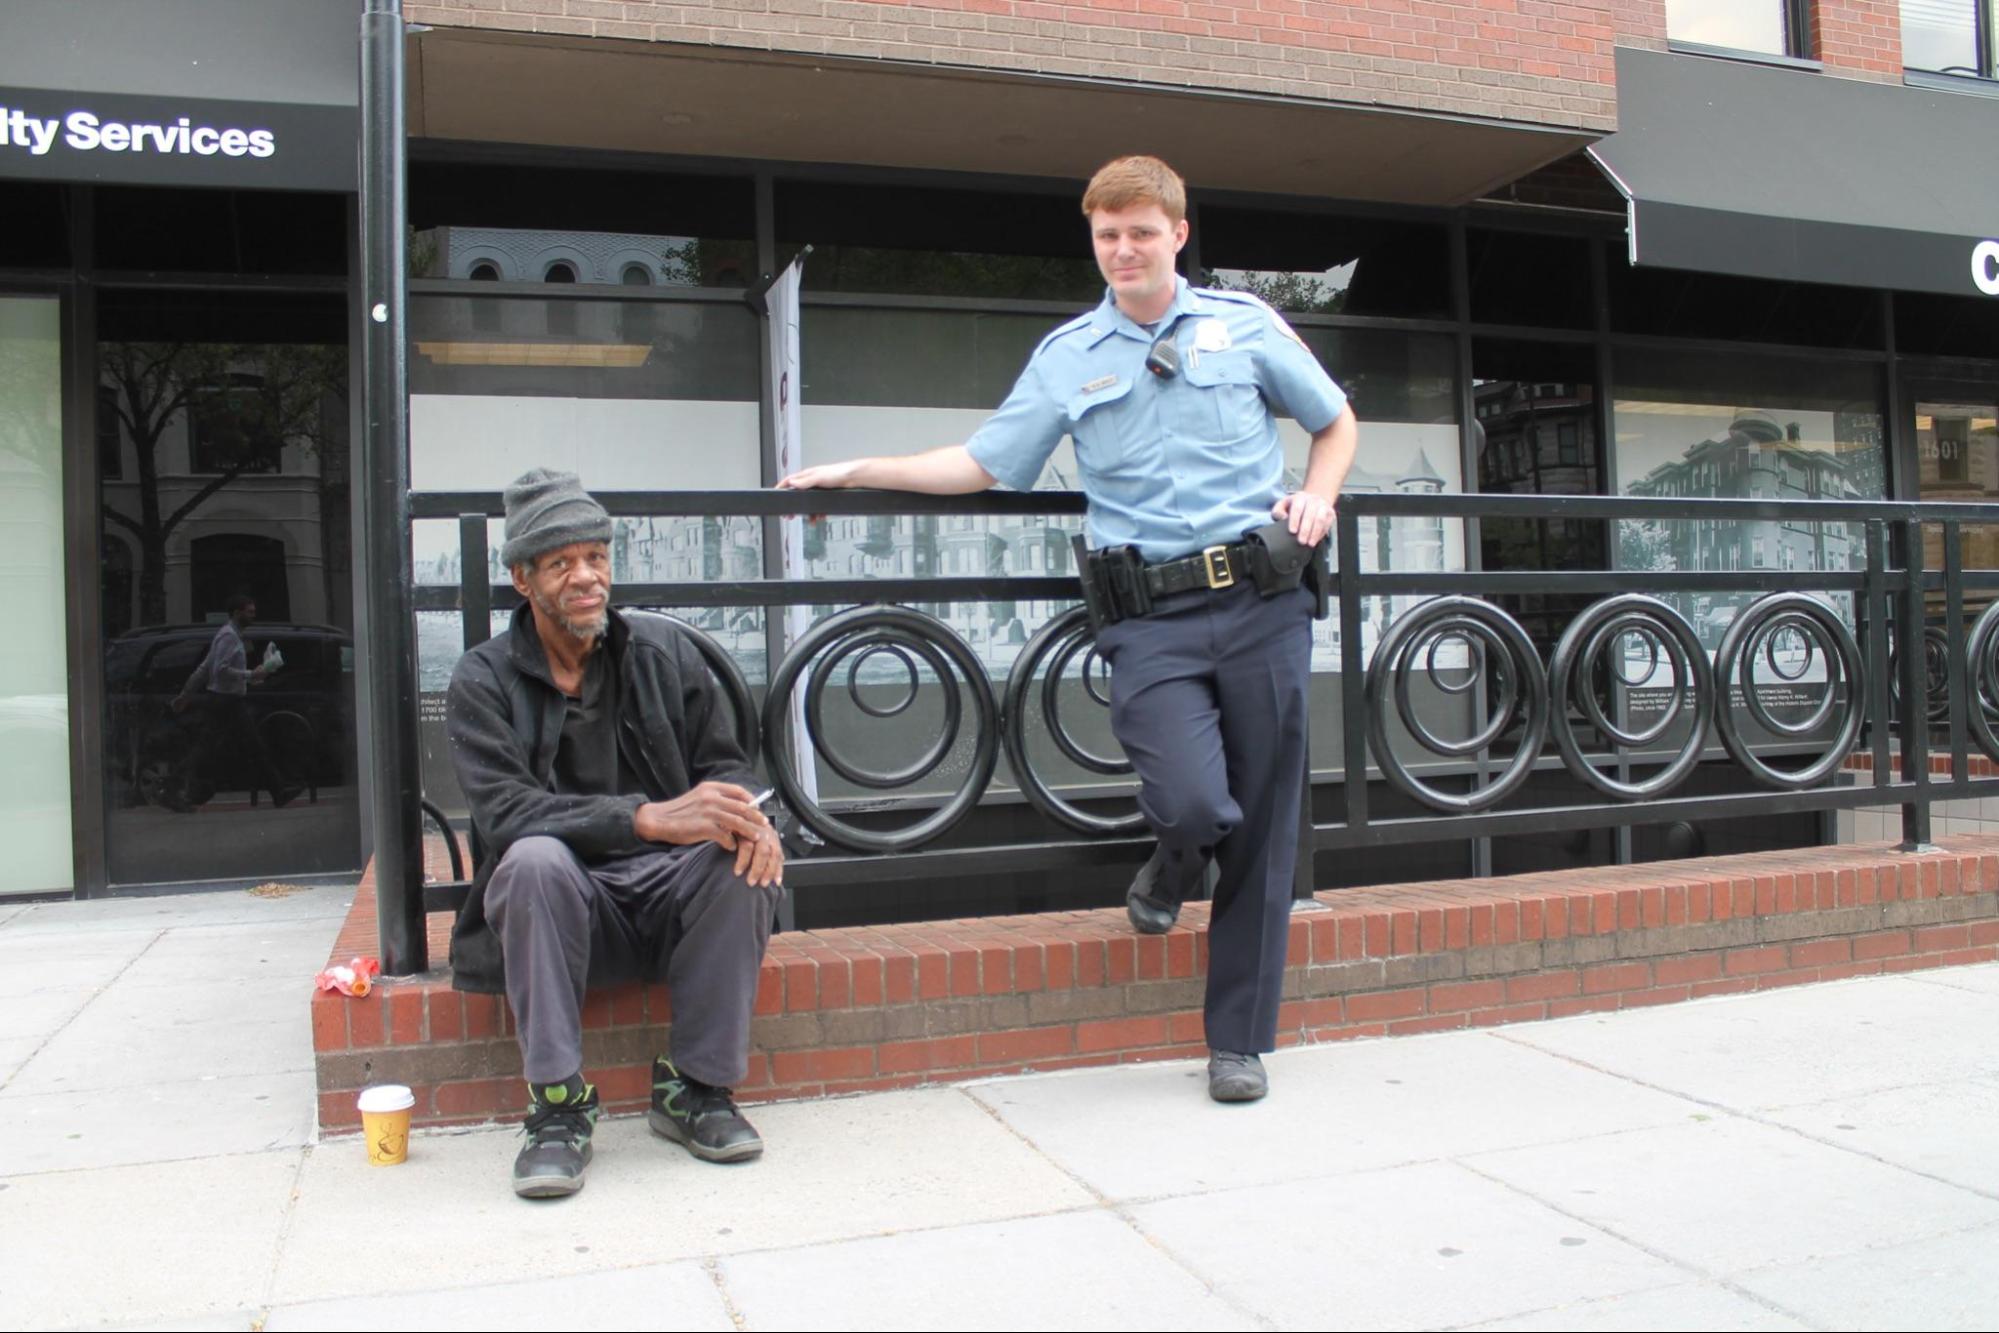 A young police officer standing next to an older man sitting on the sidewalk.